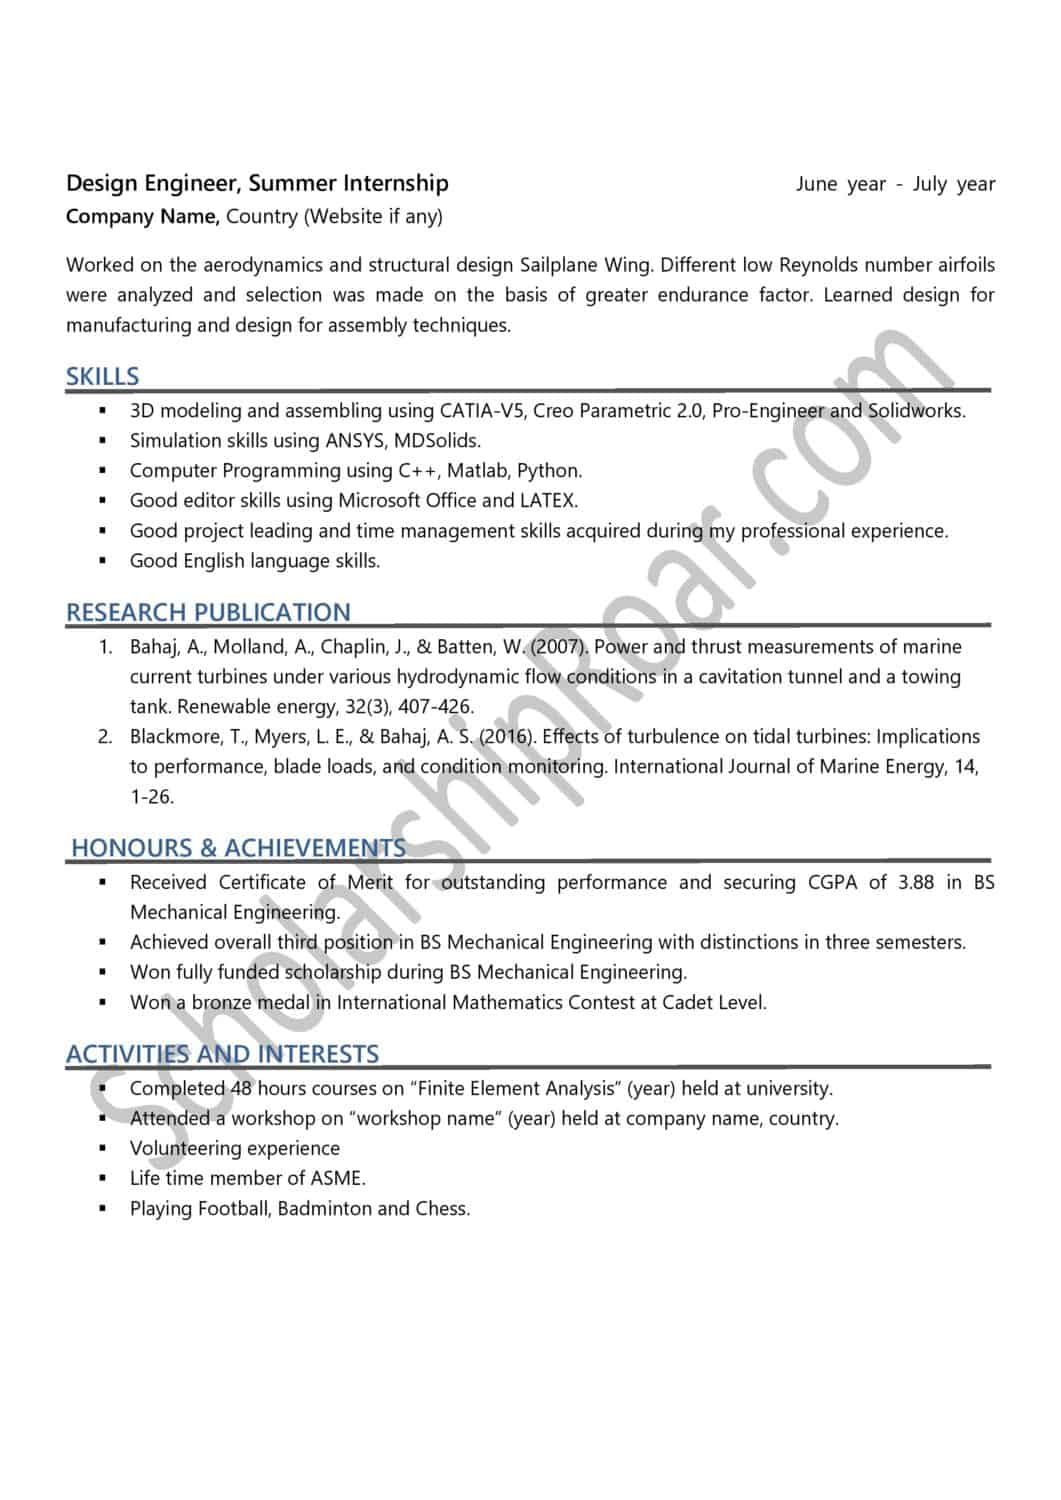 How to Write Academic CV for Scholarship (25 Examples)